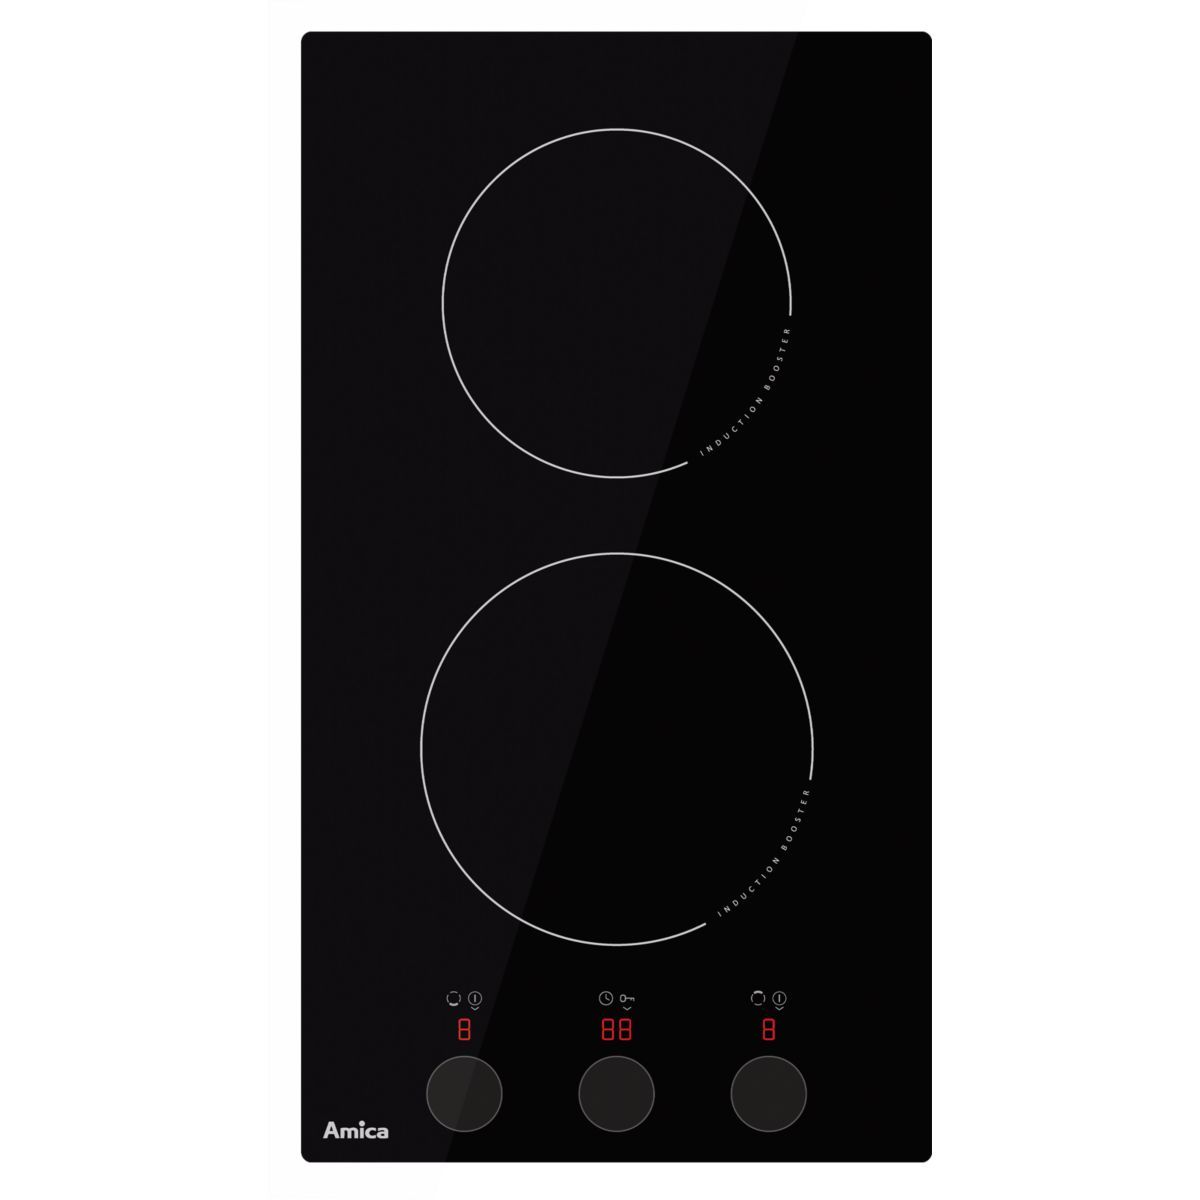 Amica Domino induction AIM2520T